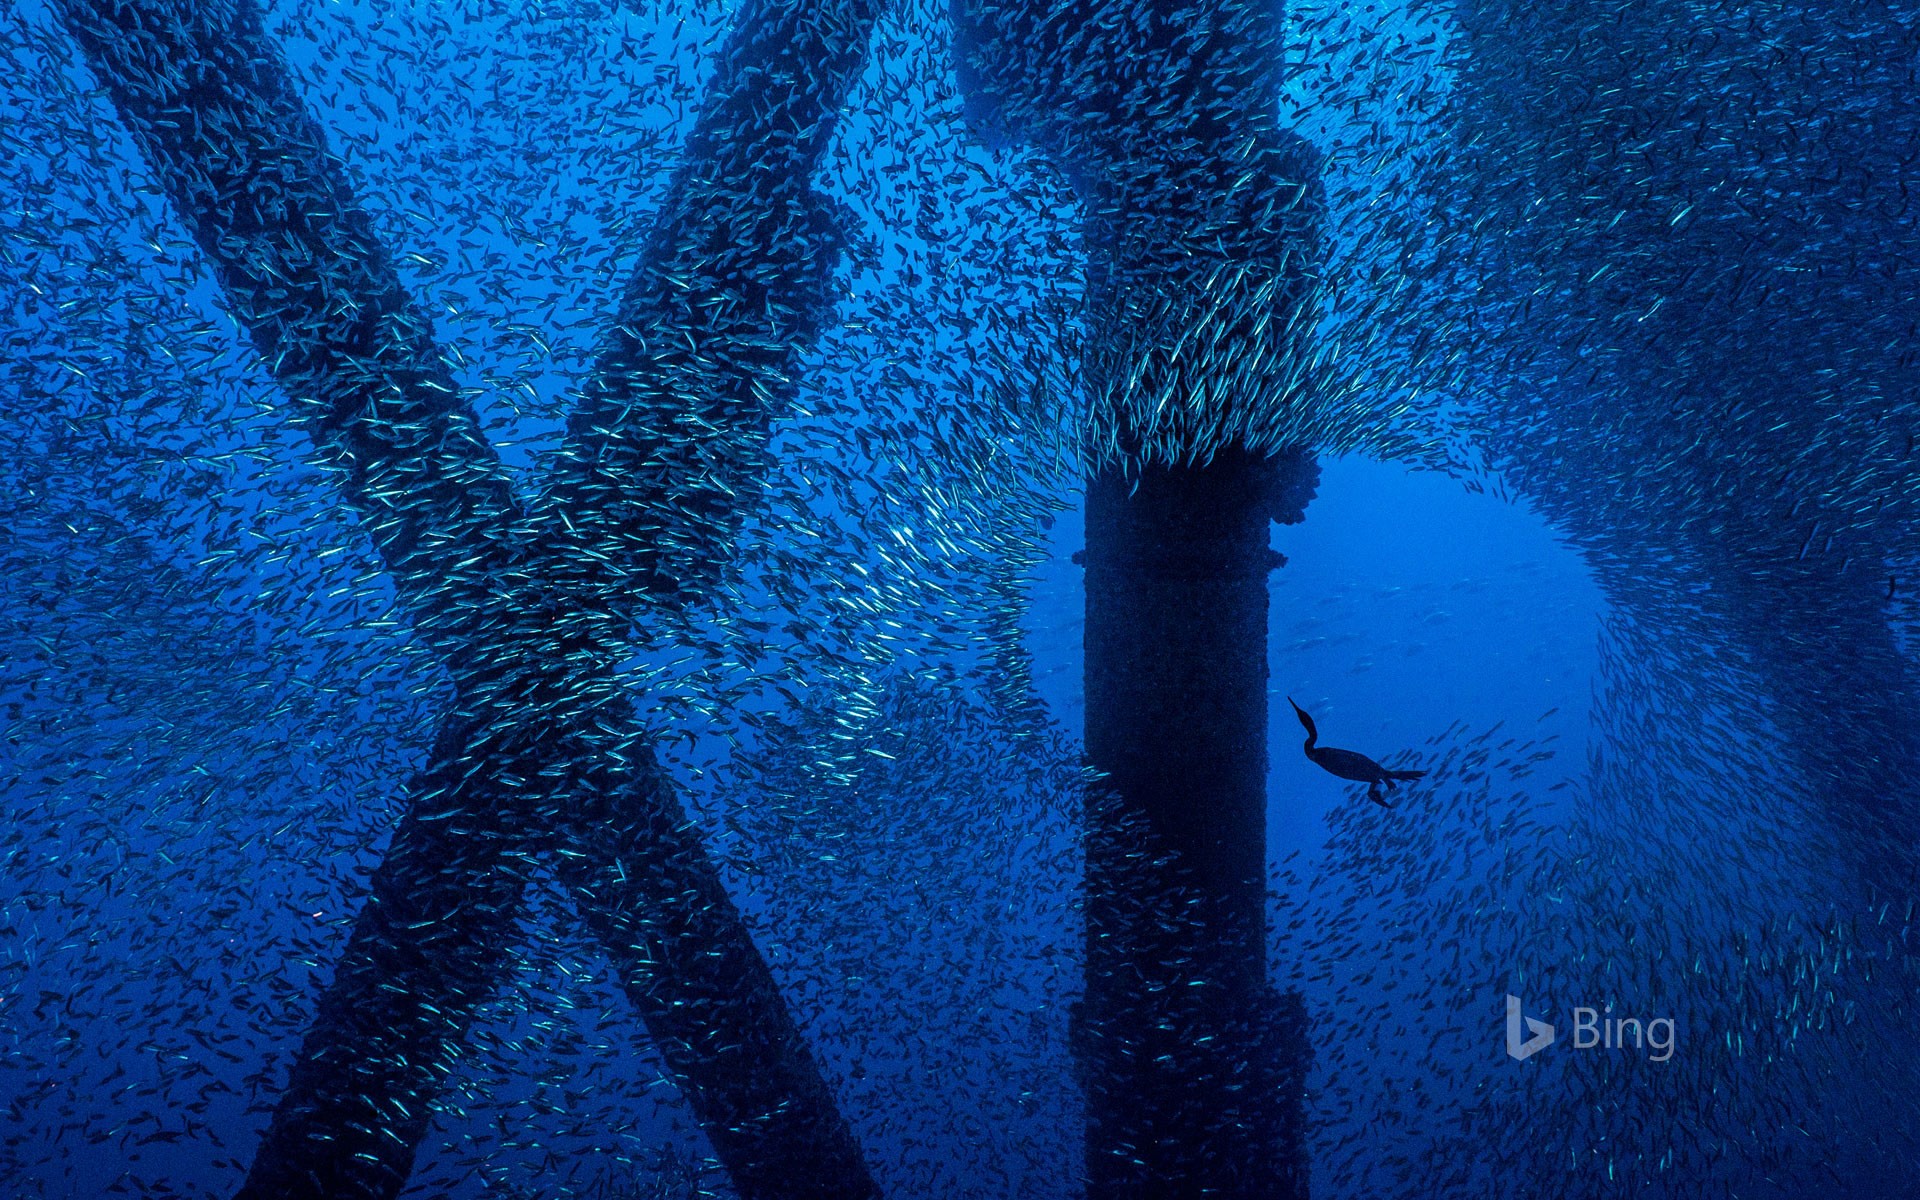 A Brandt's cormorant hunts for a meal in a school of Pacific mackerel beneath an oil rig off the coast of Los Angeles, California